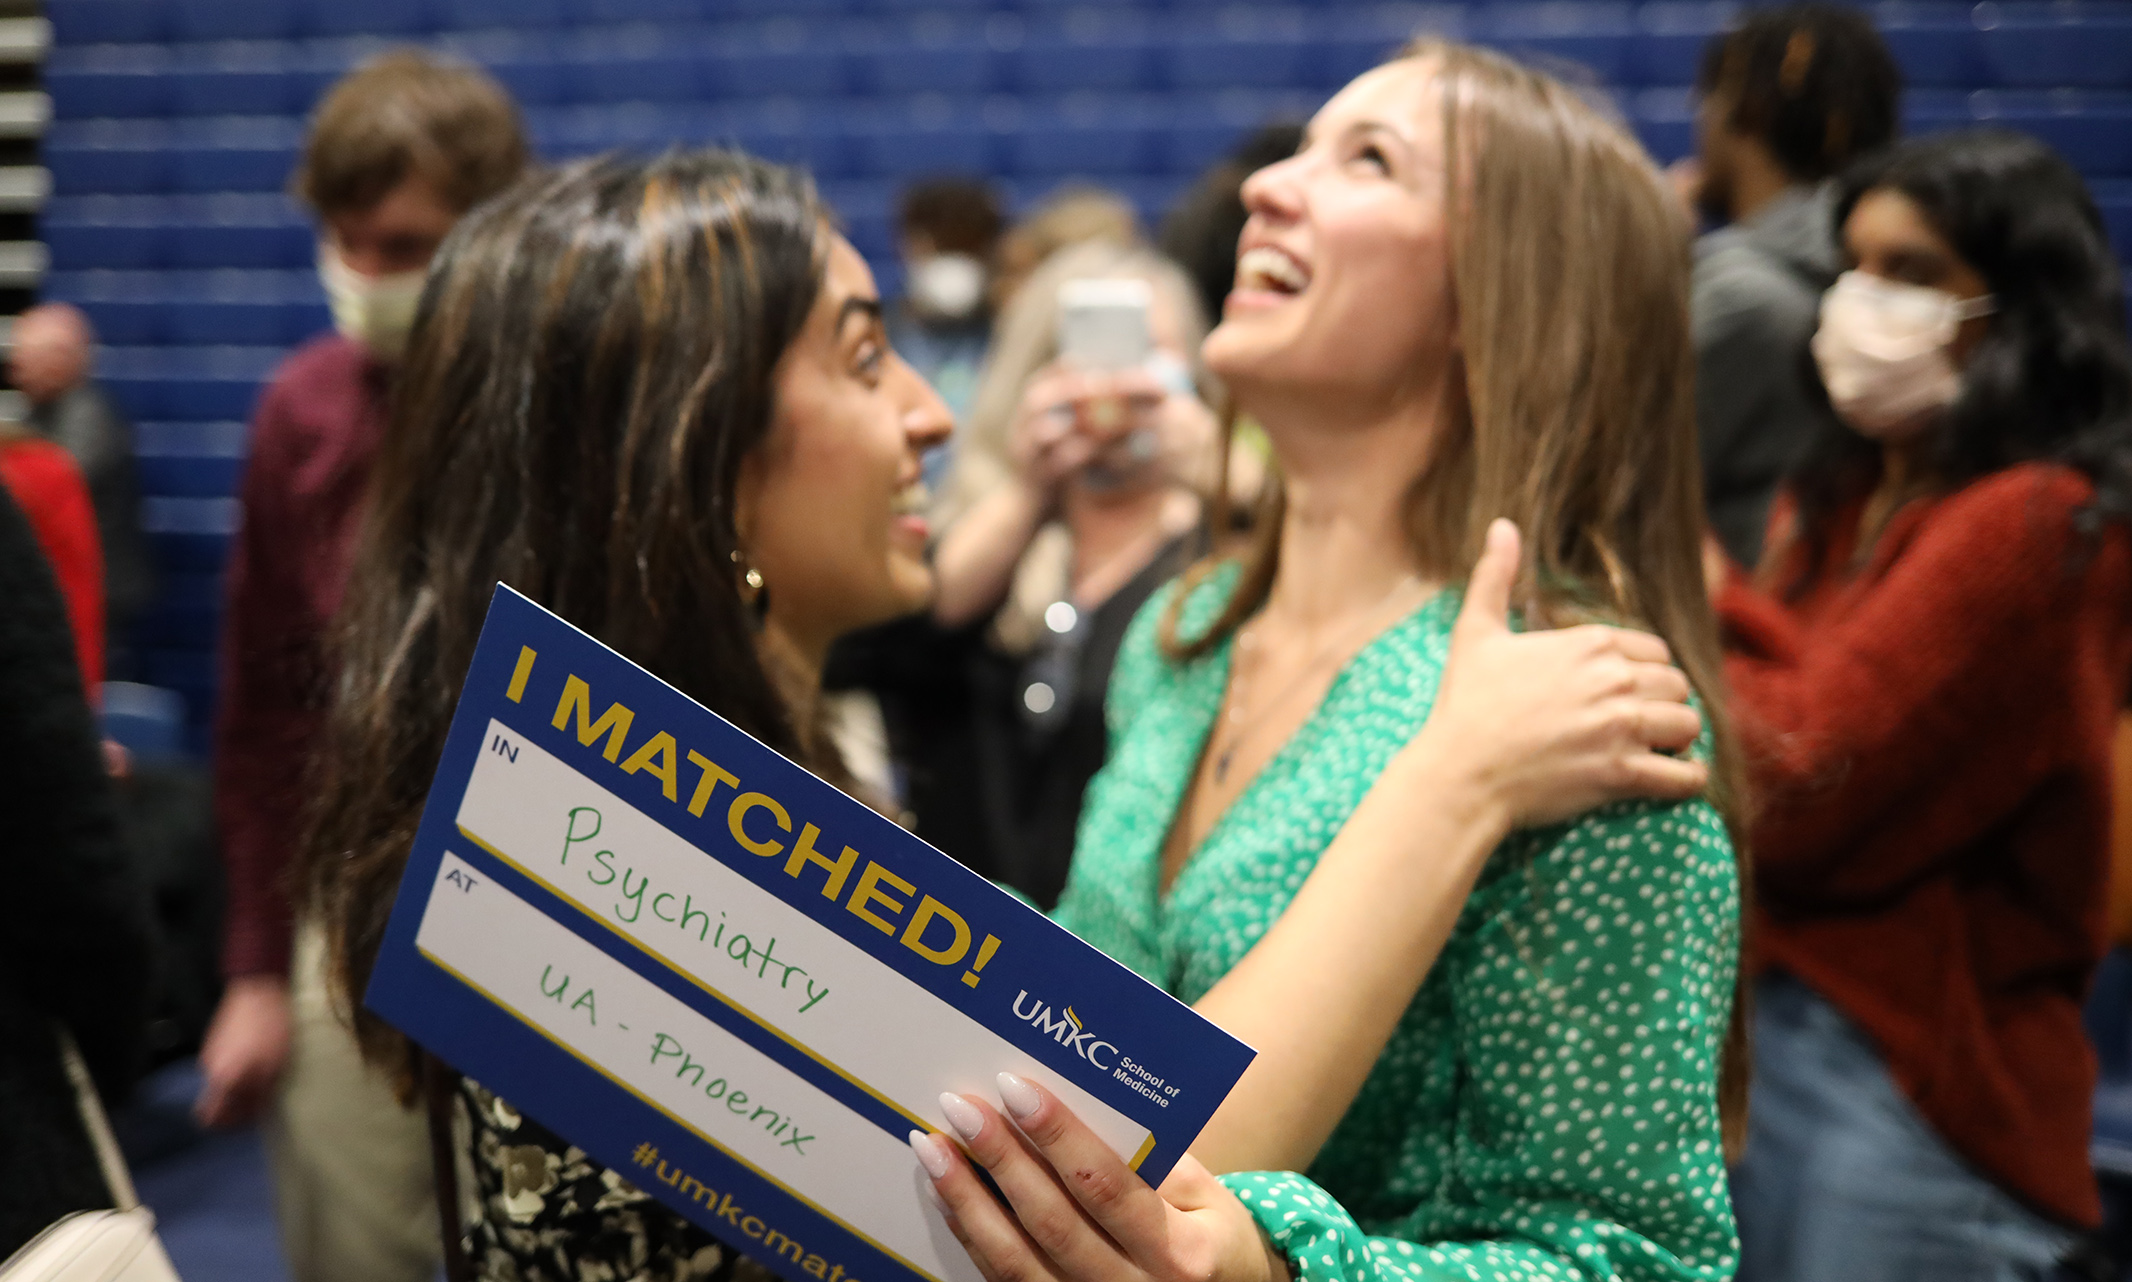 Match Day Fills UMKC Medical Students With Thrills, Excitement